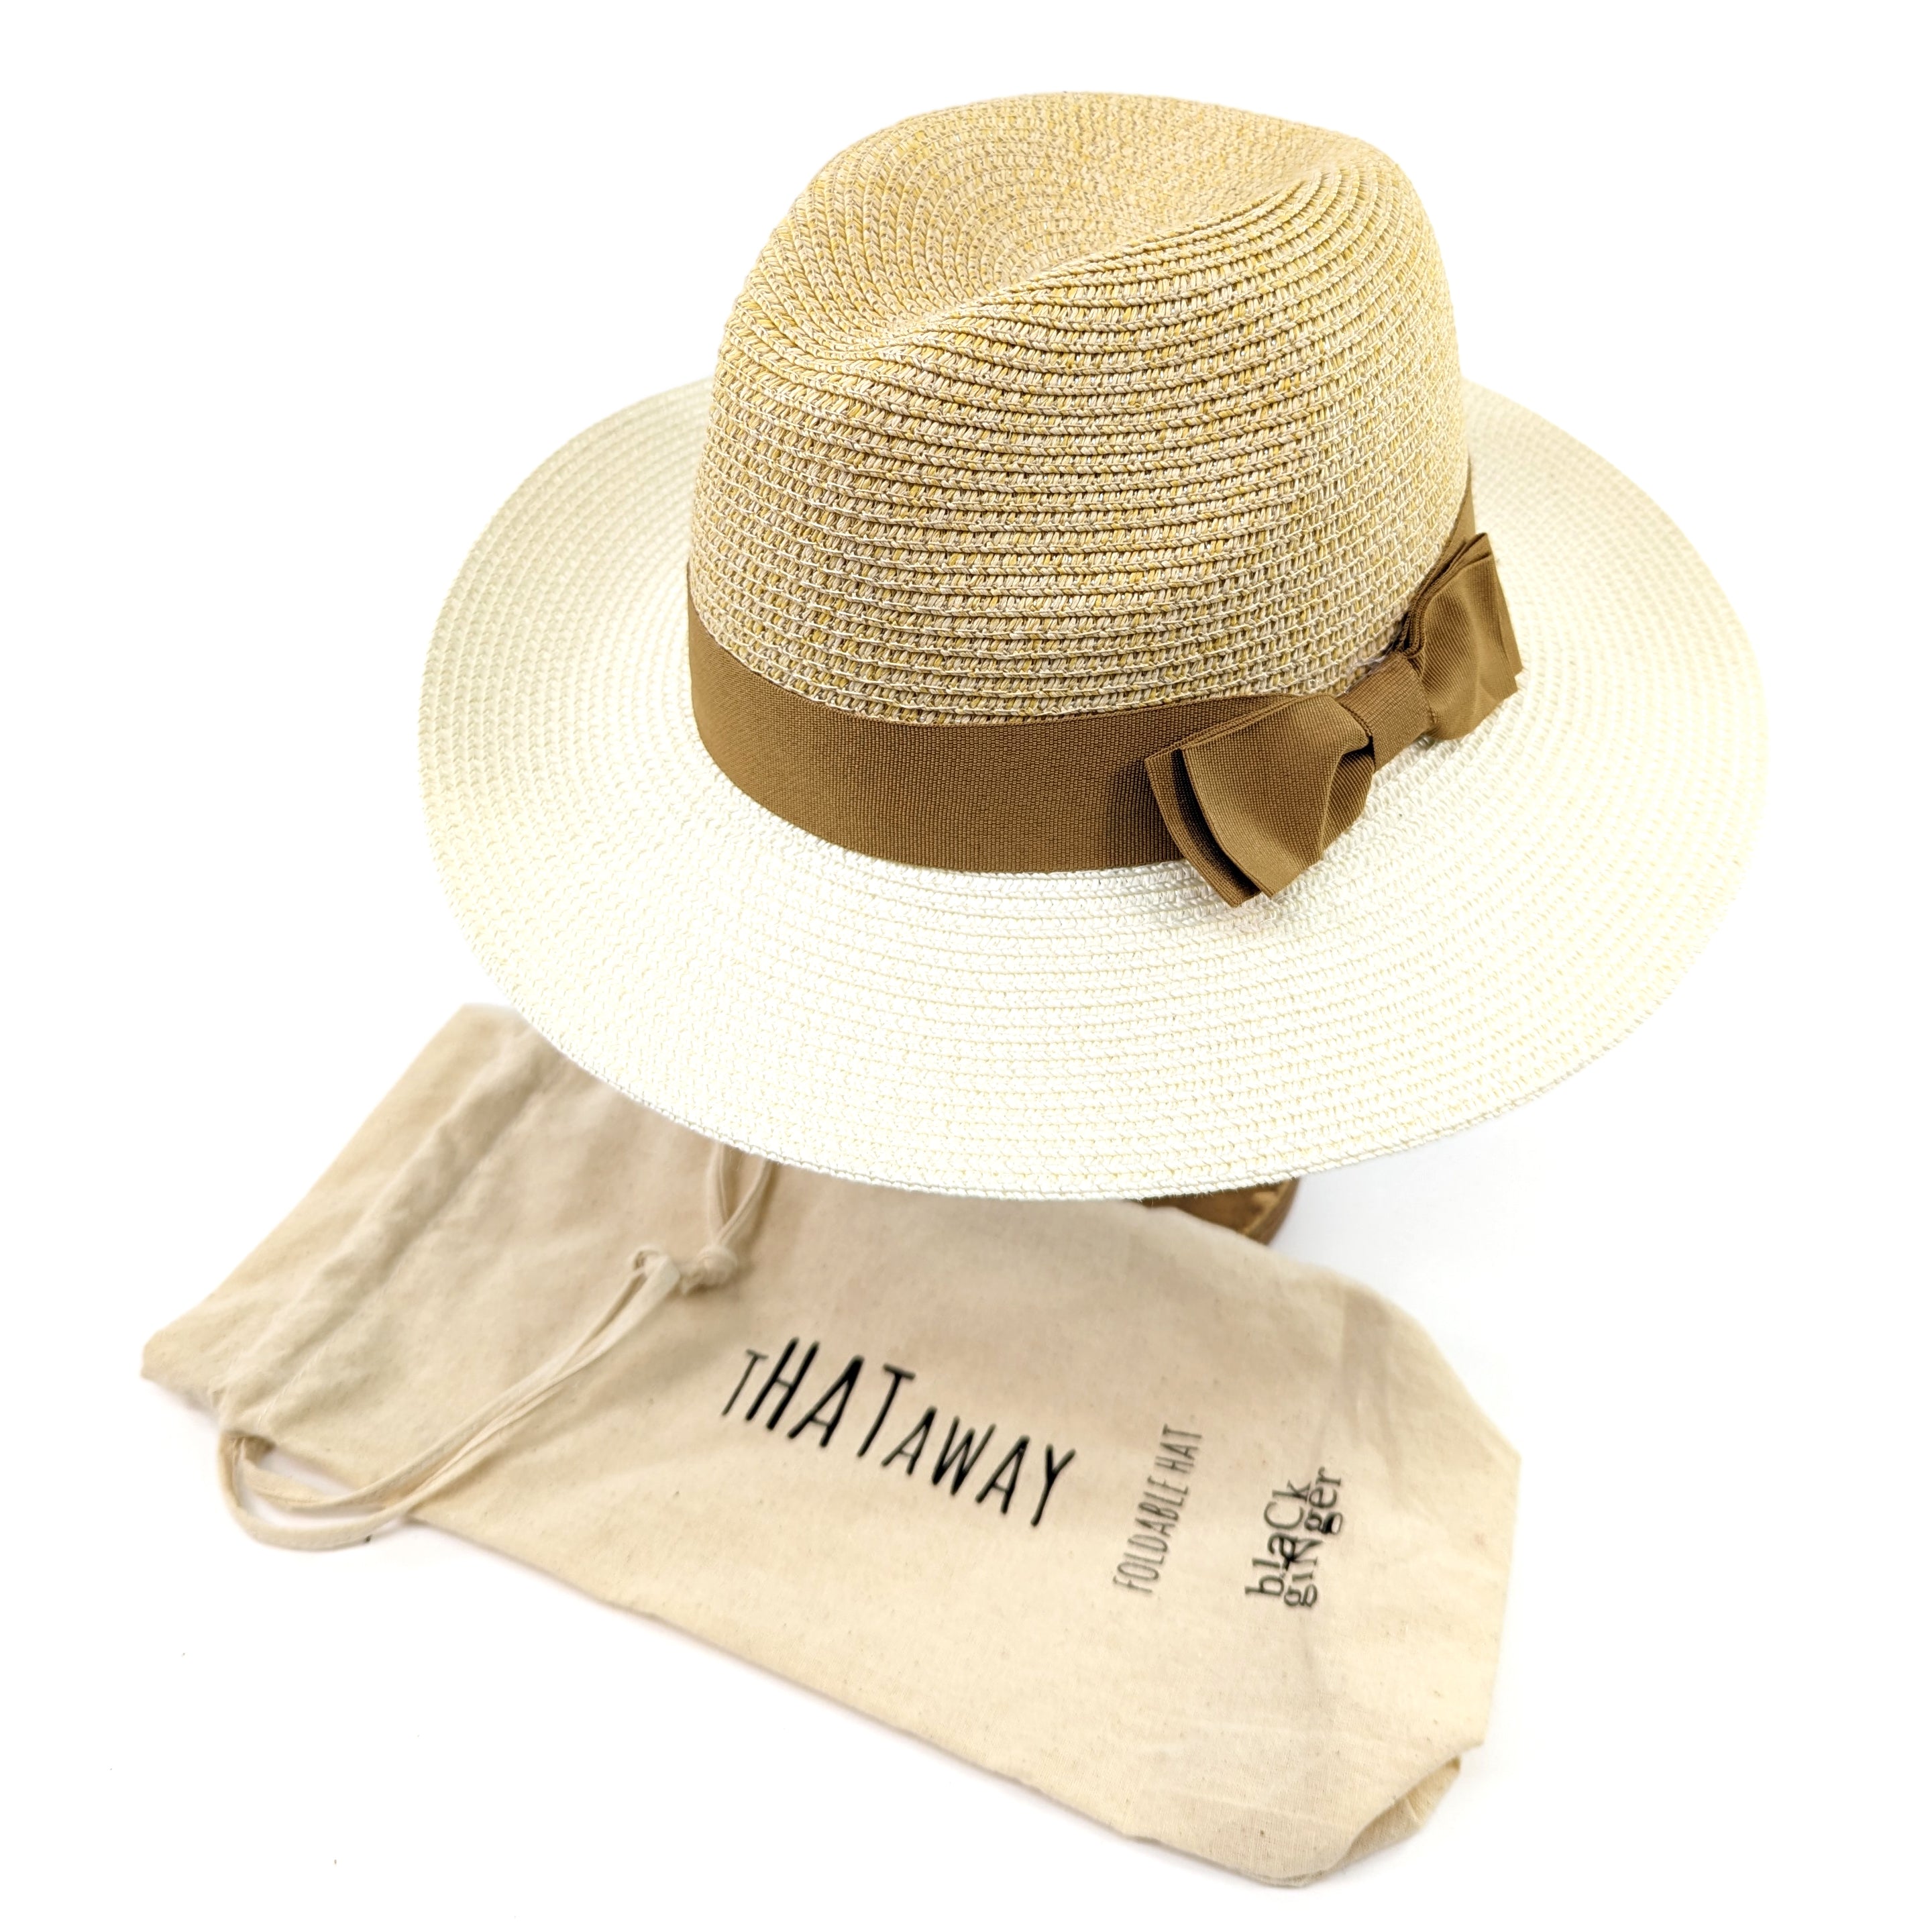 Two Tone Panama Foldable Hat - Natural/Yellow  (with Bag)